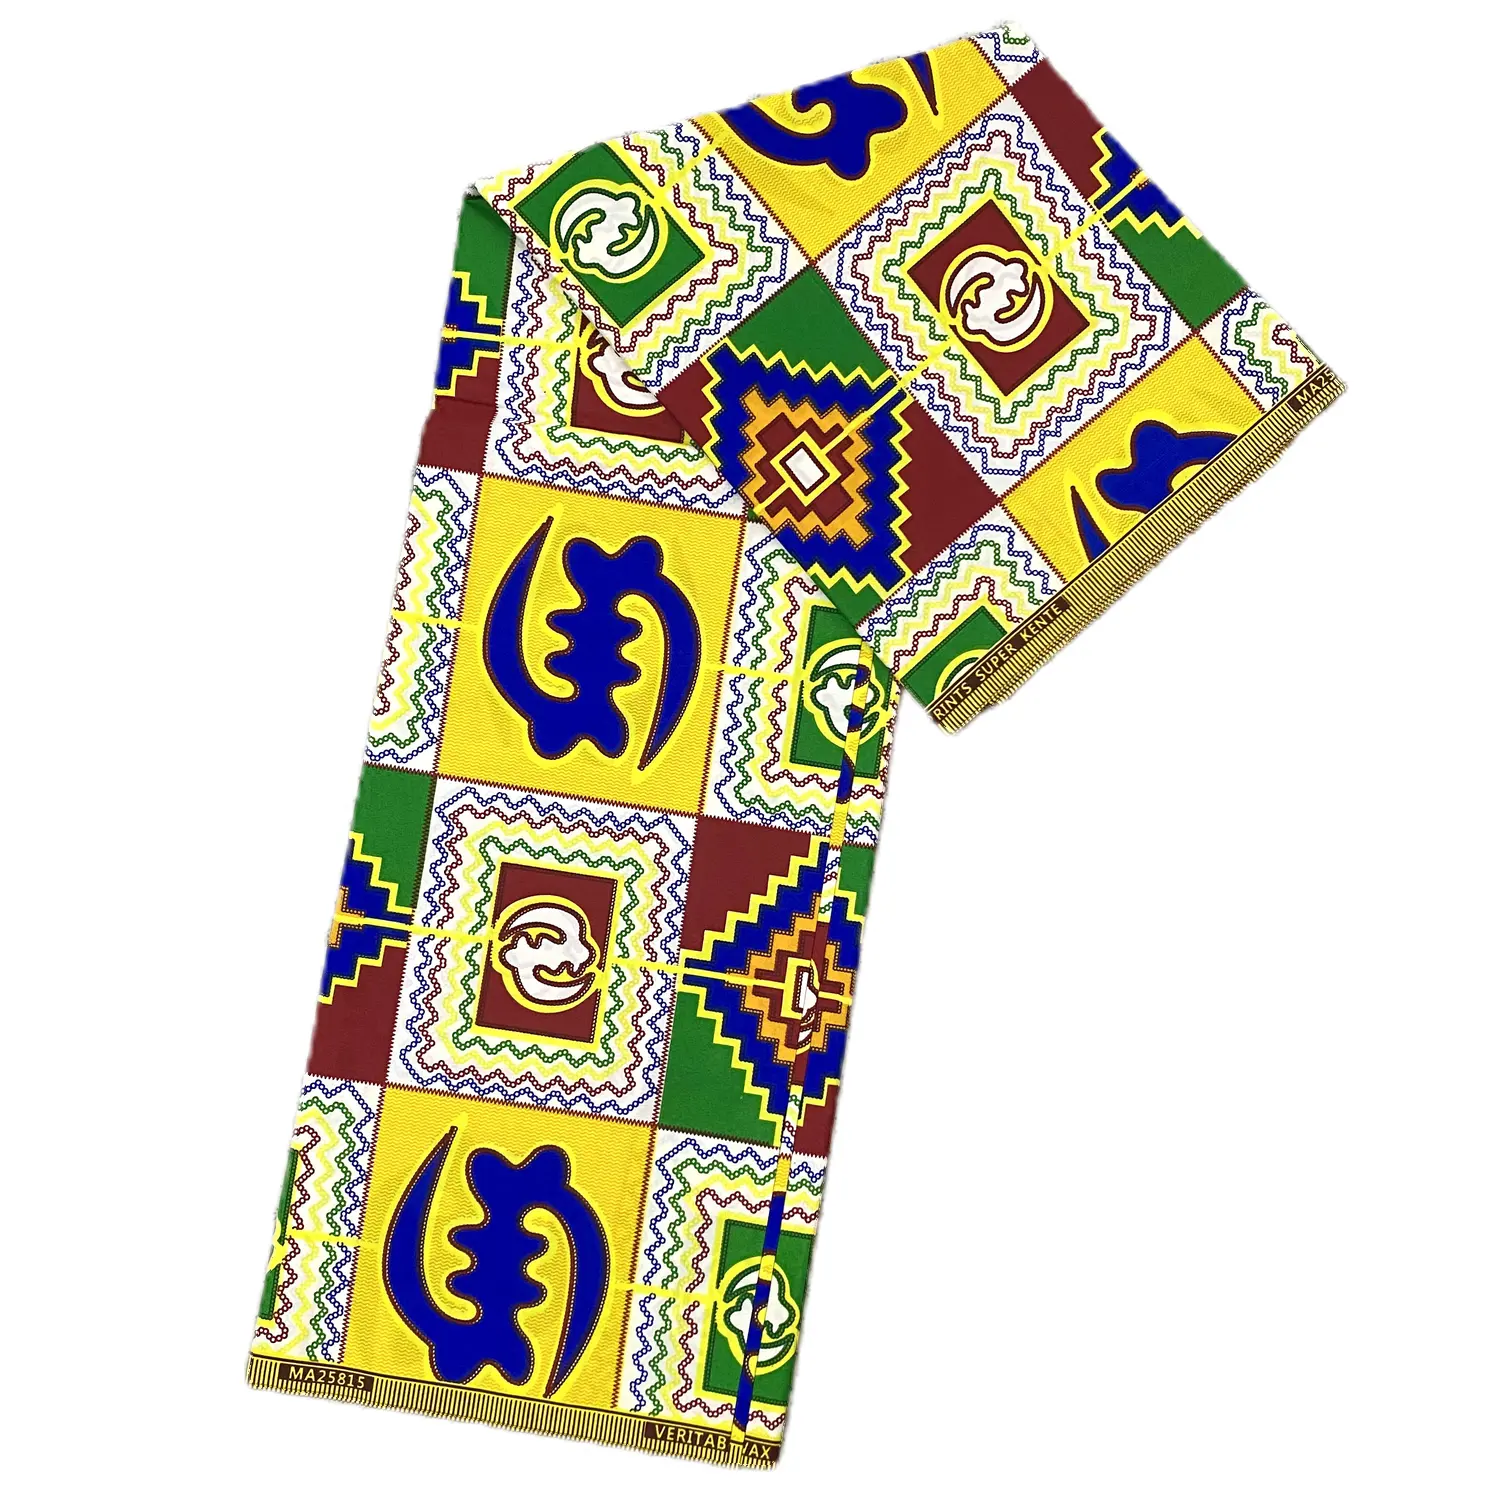 Factory100%Polyester Africa Ankara Batik Fabric Print Wax African Textile Material Design Fashion 6 Yards For Women Colth Dress